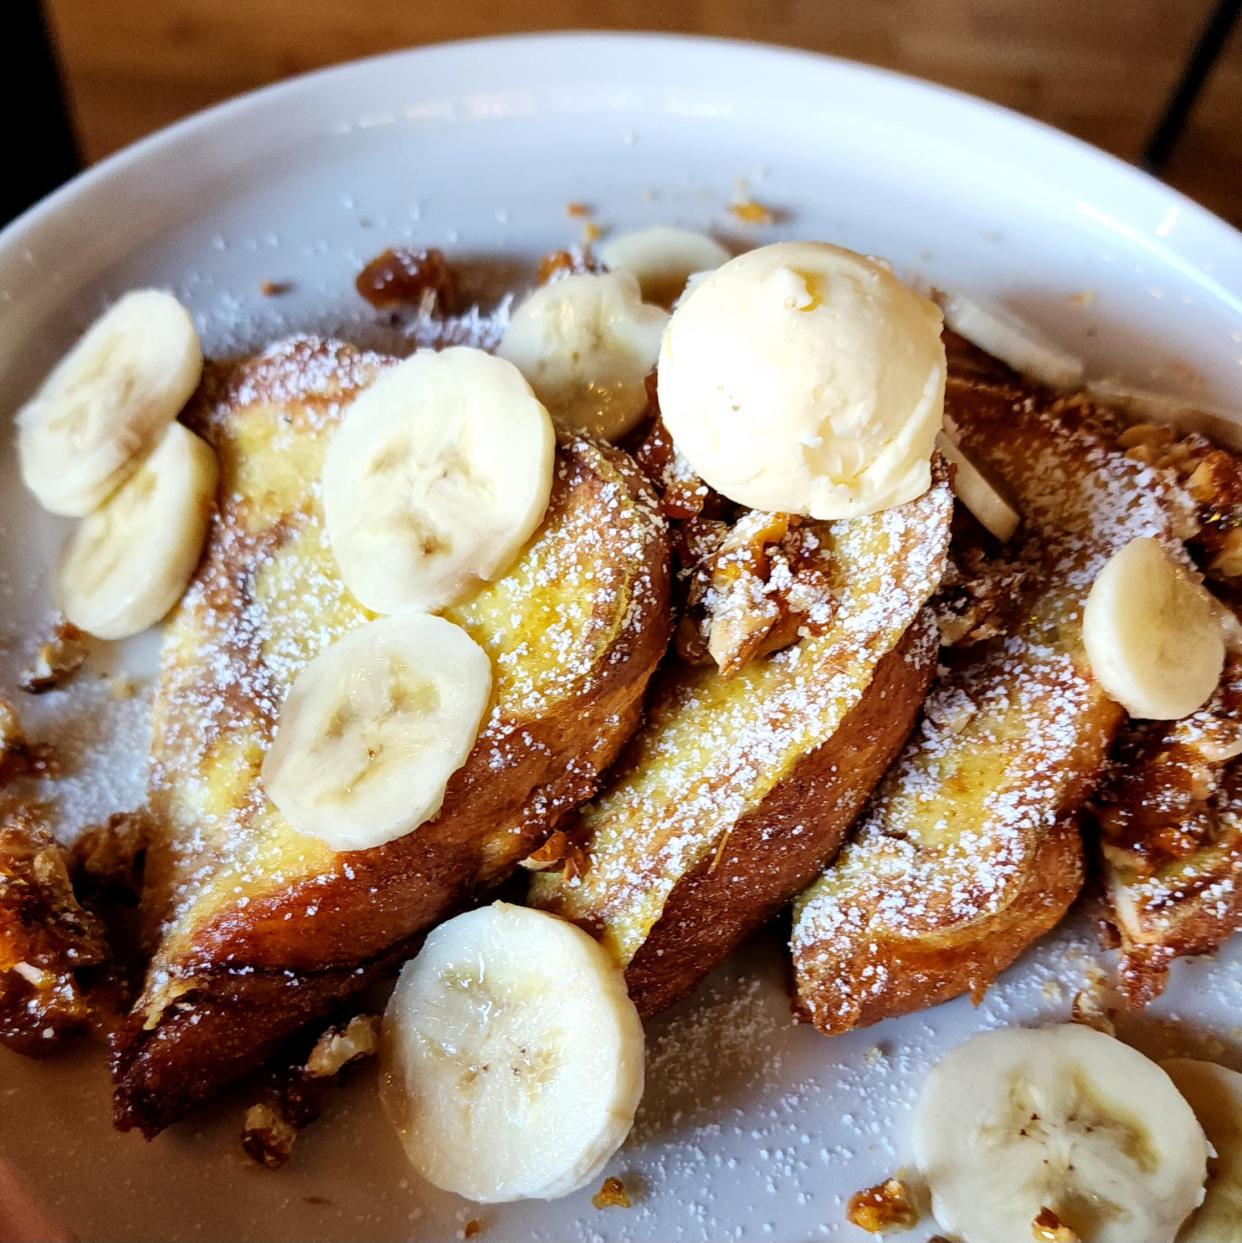 French Toast at The Patio on Broadway comes with fresh banana and candied walnuts on cinnamon bread and is served with maple syrup.